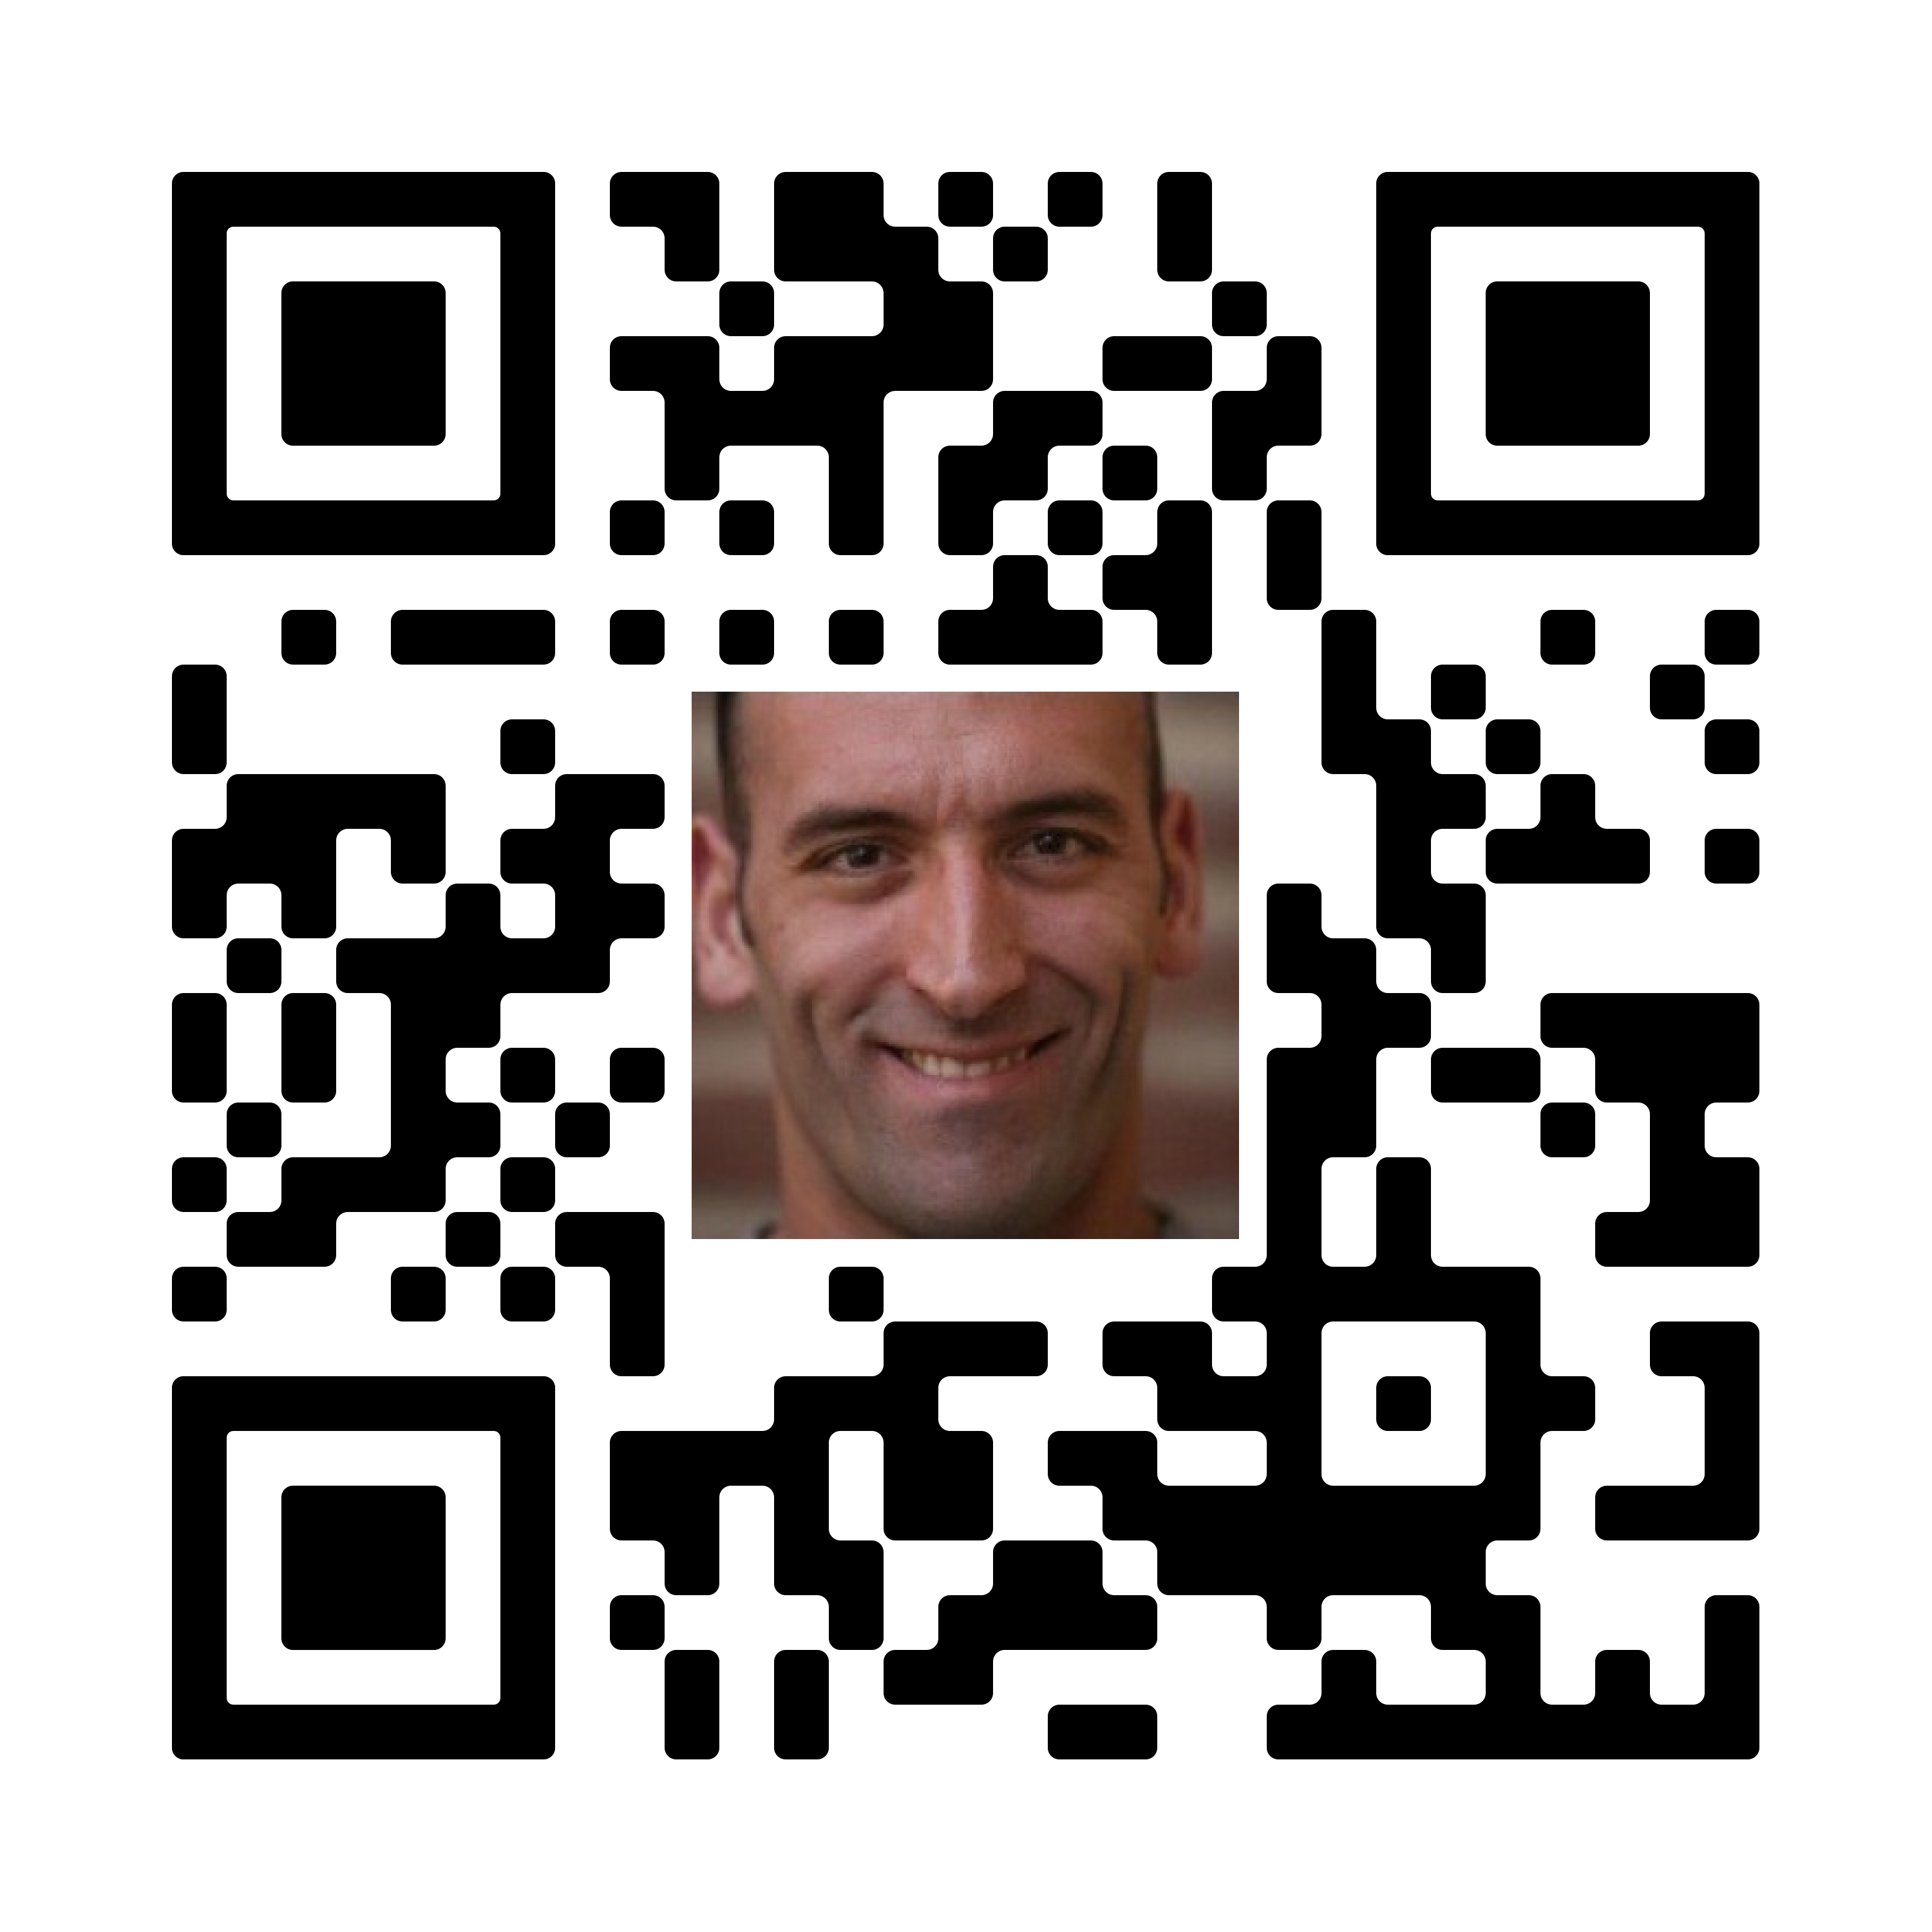 My Contact Details in a QR Code